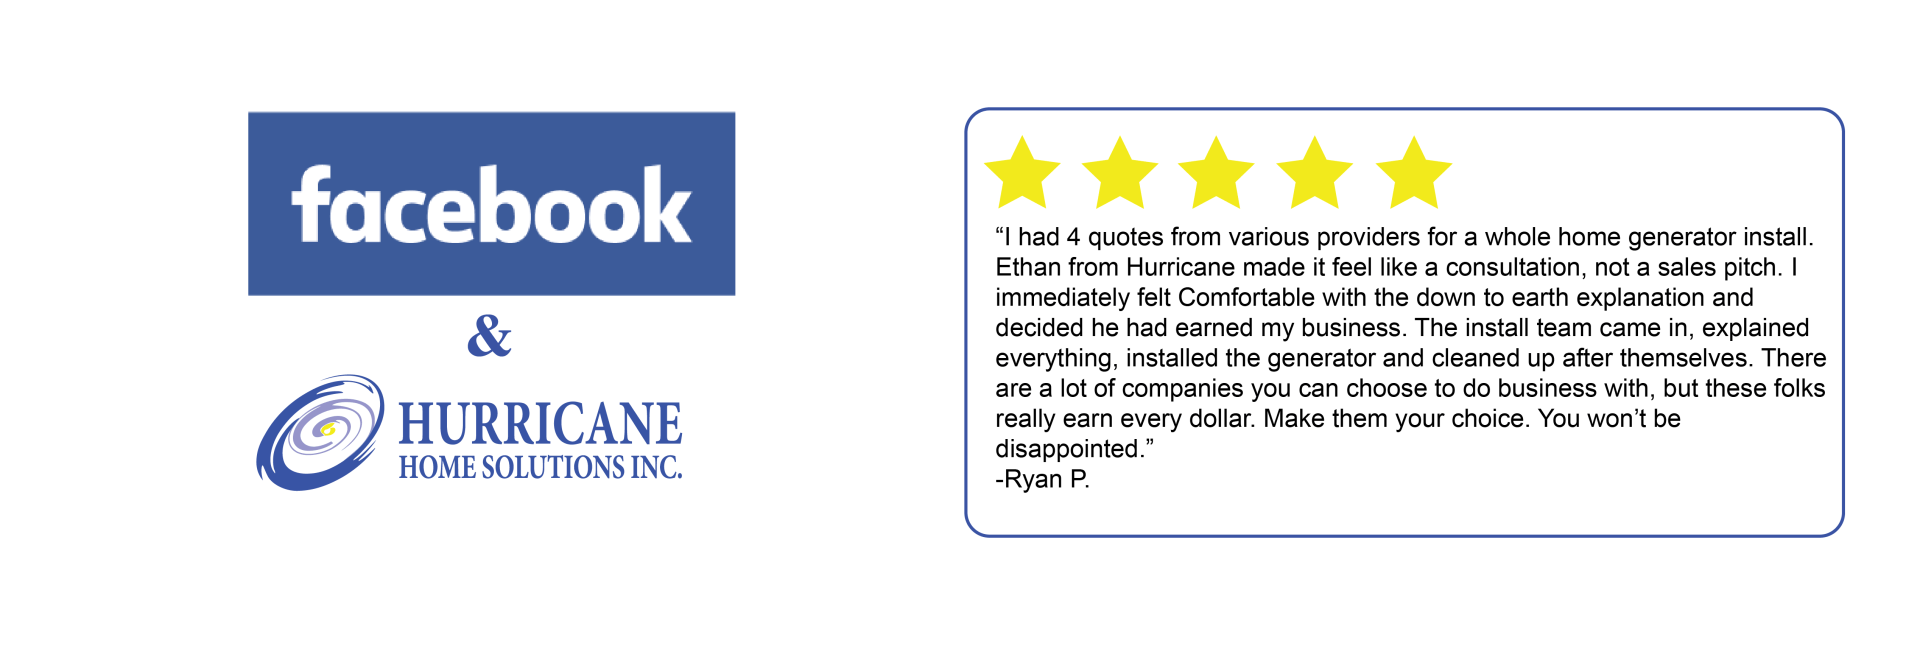 A 5-Star Review on Facebook for Hurricane Home Solutions